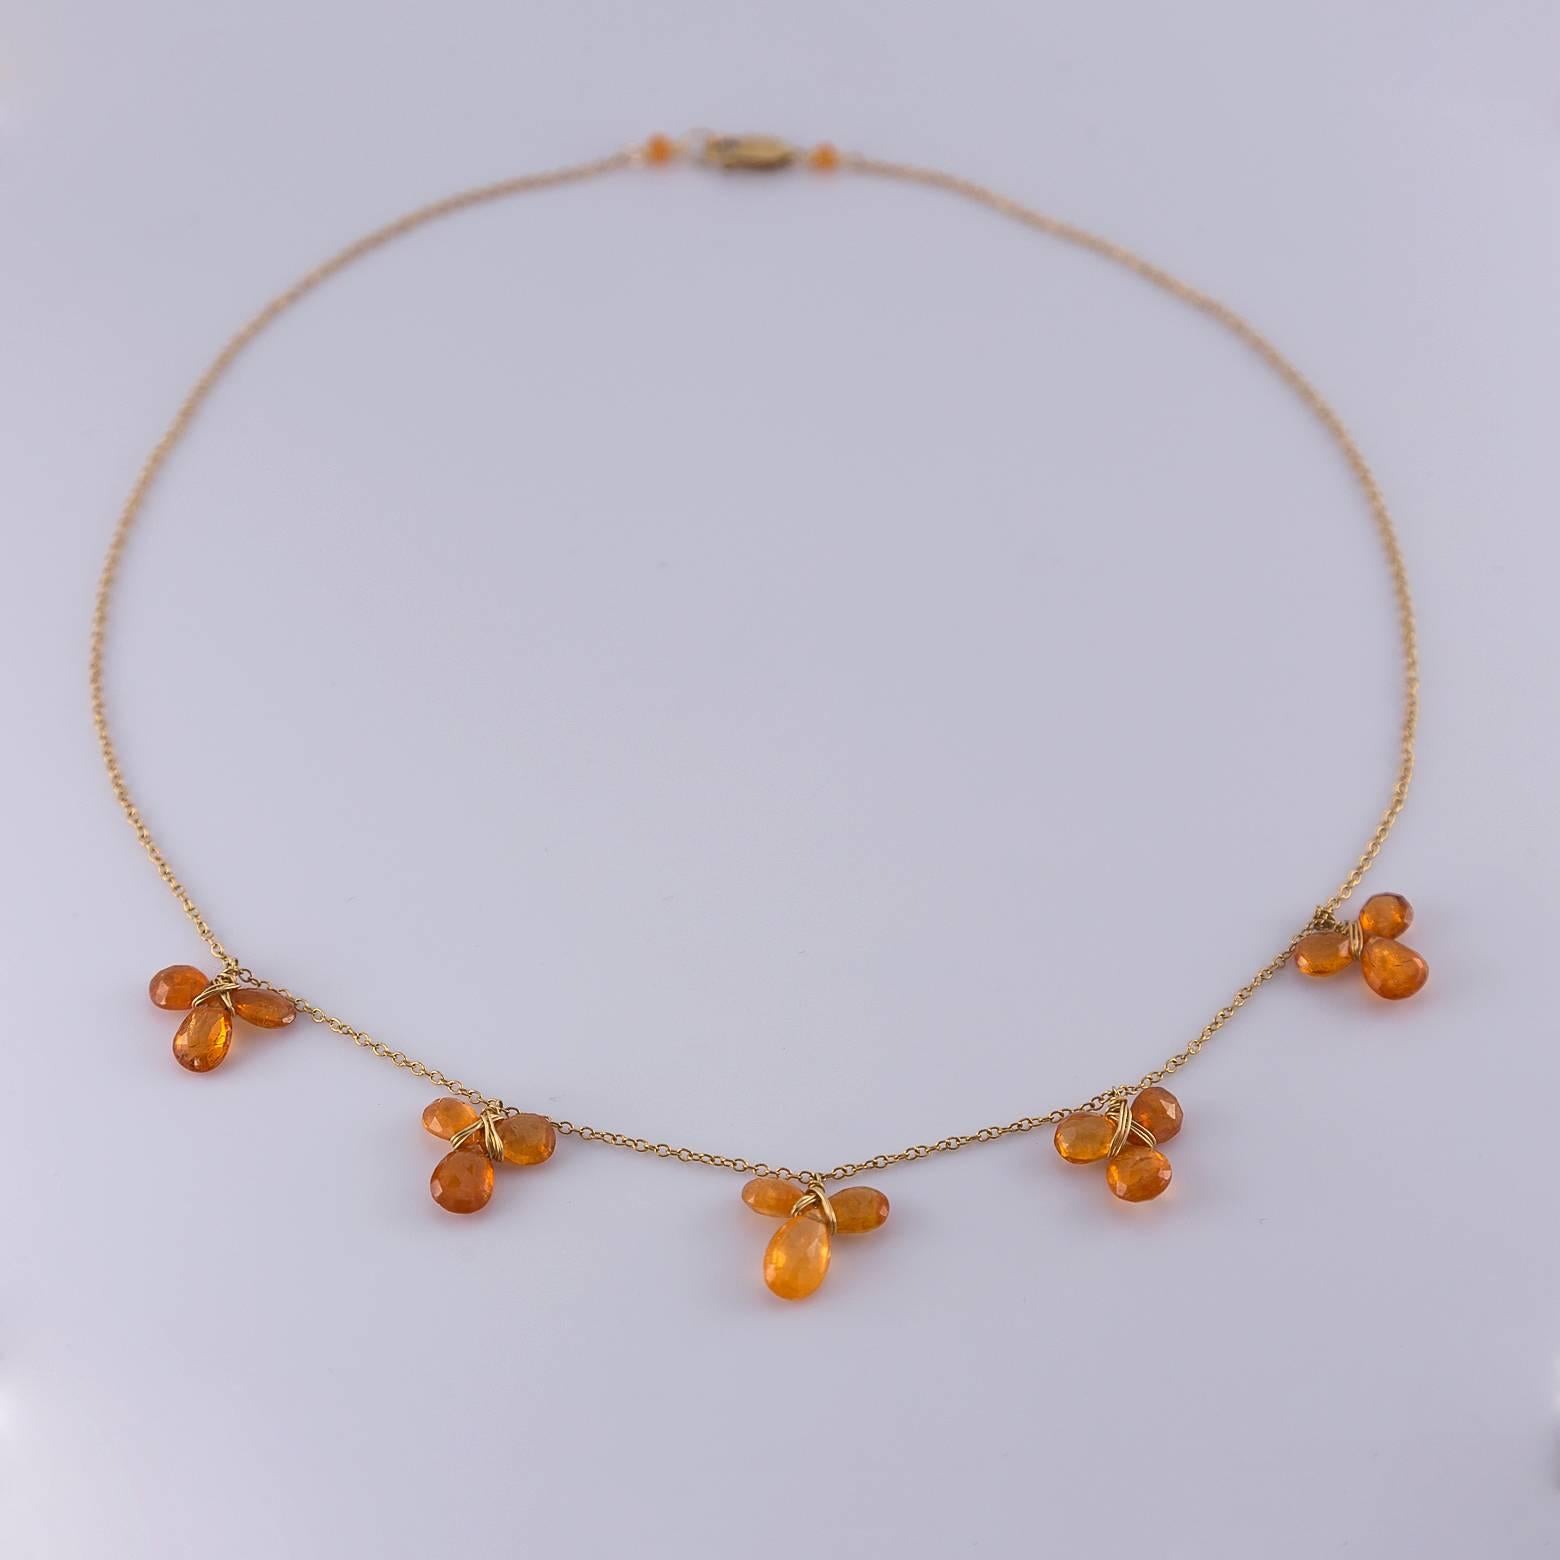 This Modern Hessonite Garnet necklace has rich orange hues and a wide gradient of colors that make it unique and absolutely stunning. Hand-made in the San Francisco Bay Area in California by one of our top designers this necklace is truly one of a